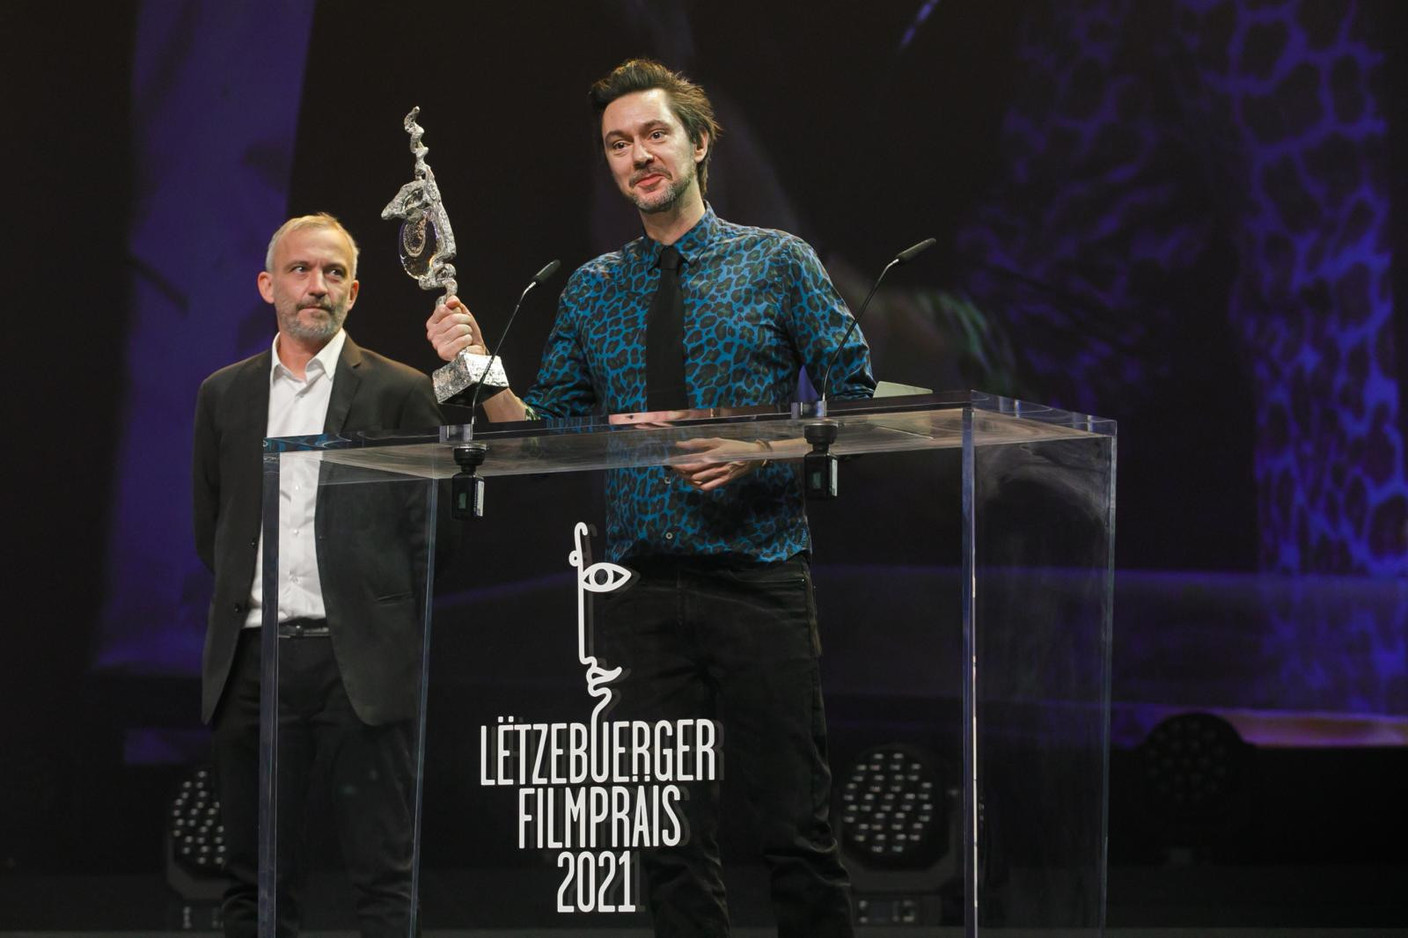 Thierry Faber and Christophe Wagner celebrate the bext TV or new media production prize for Capitani Matic Zorman